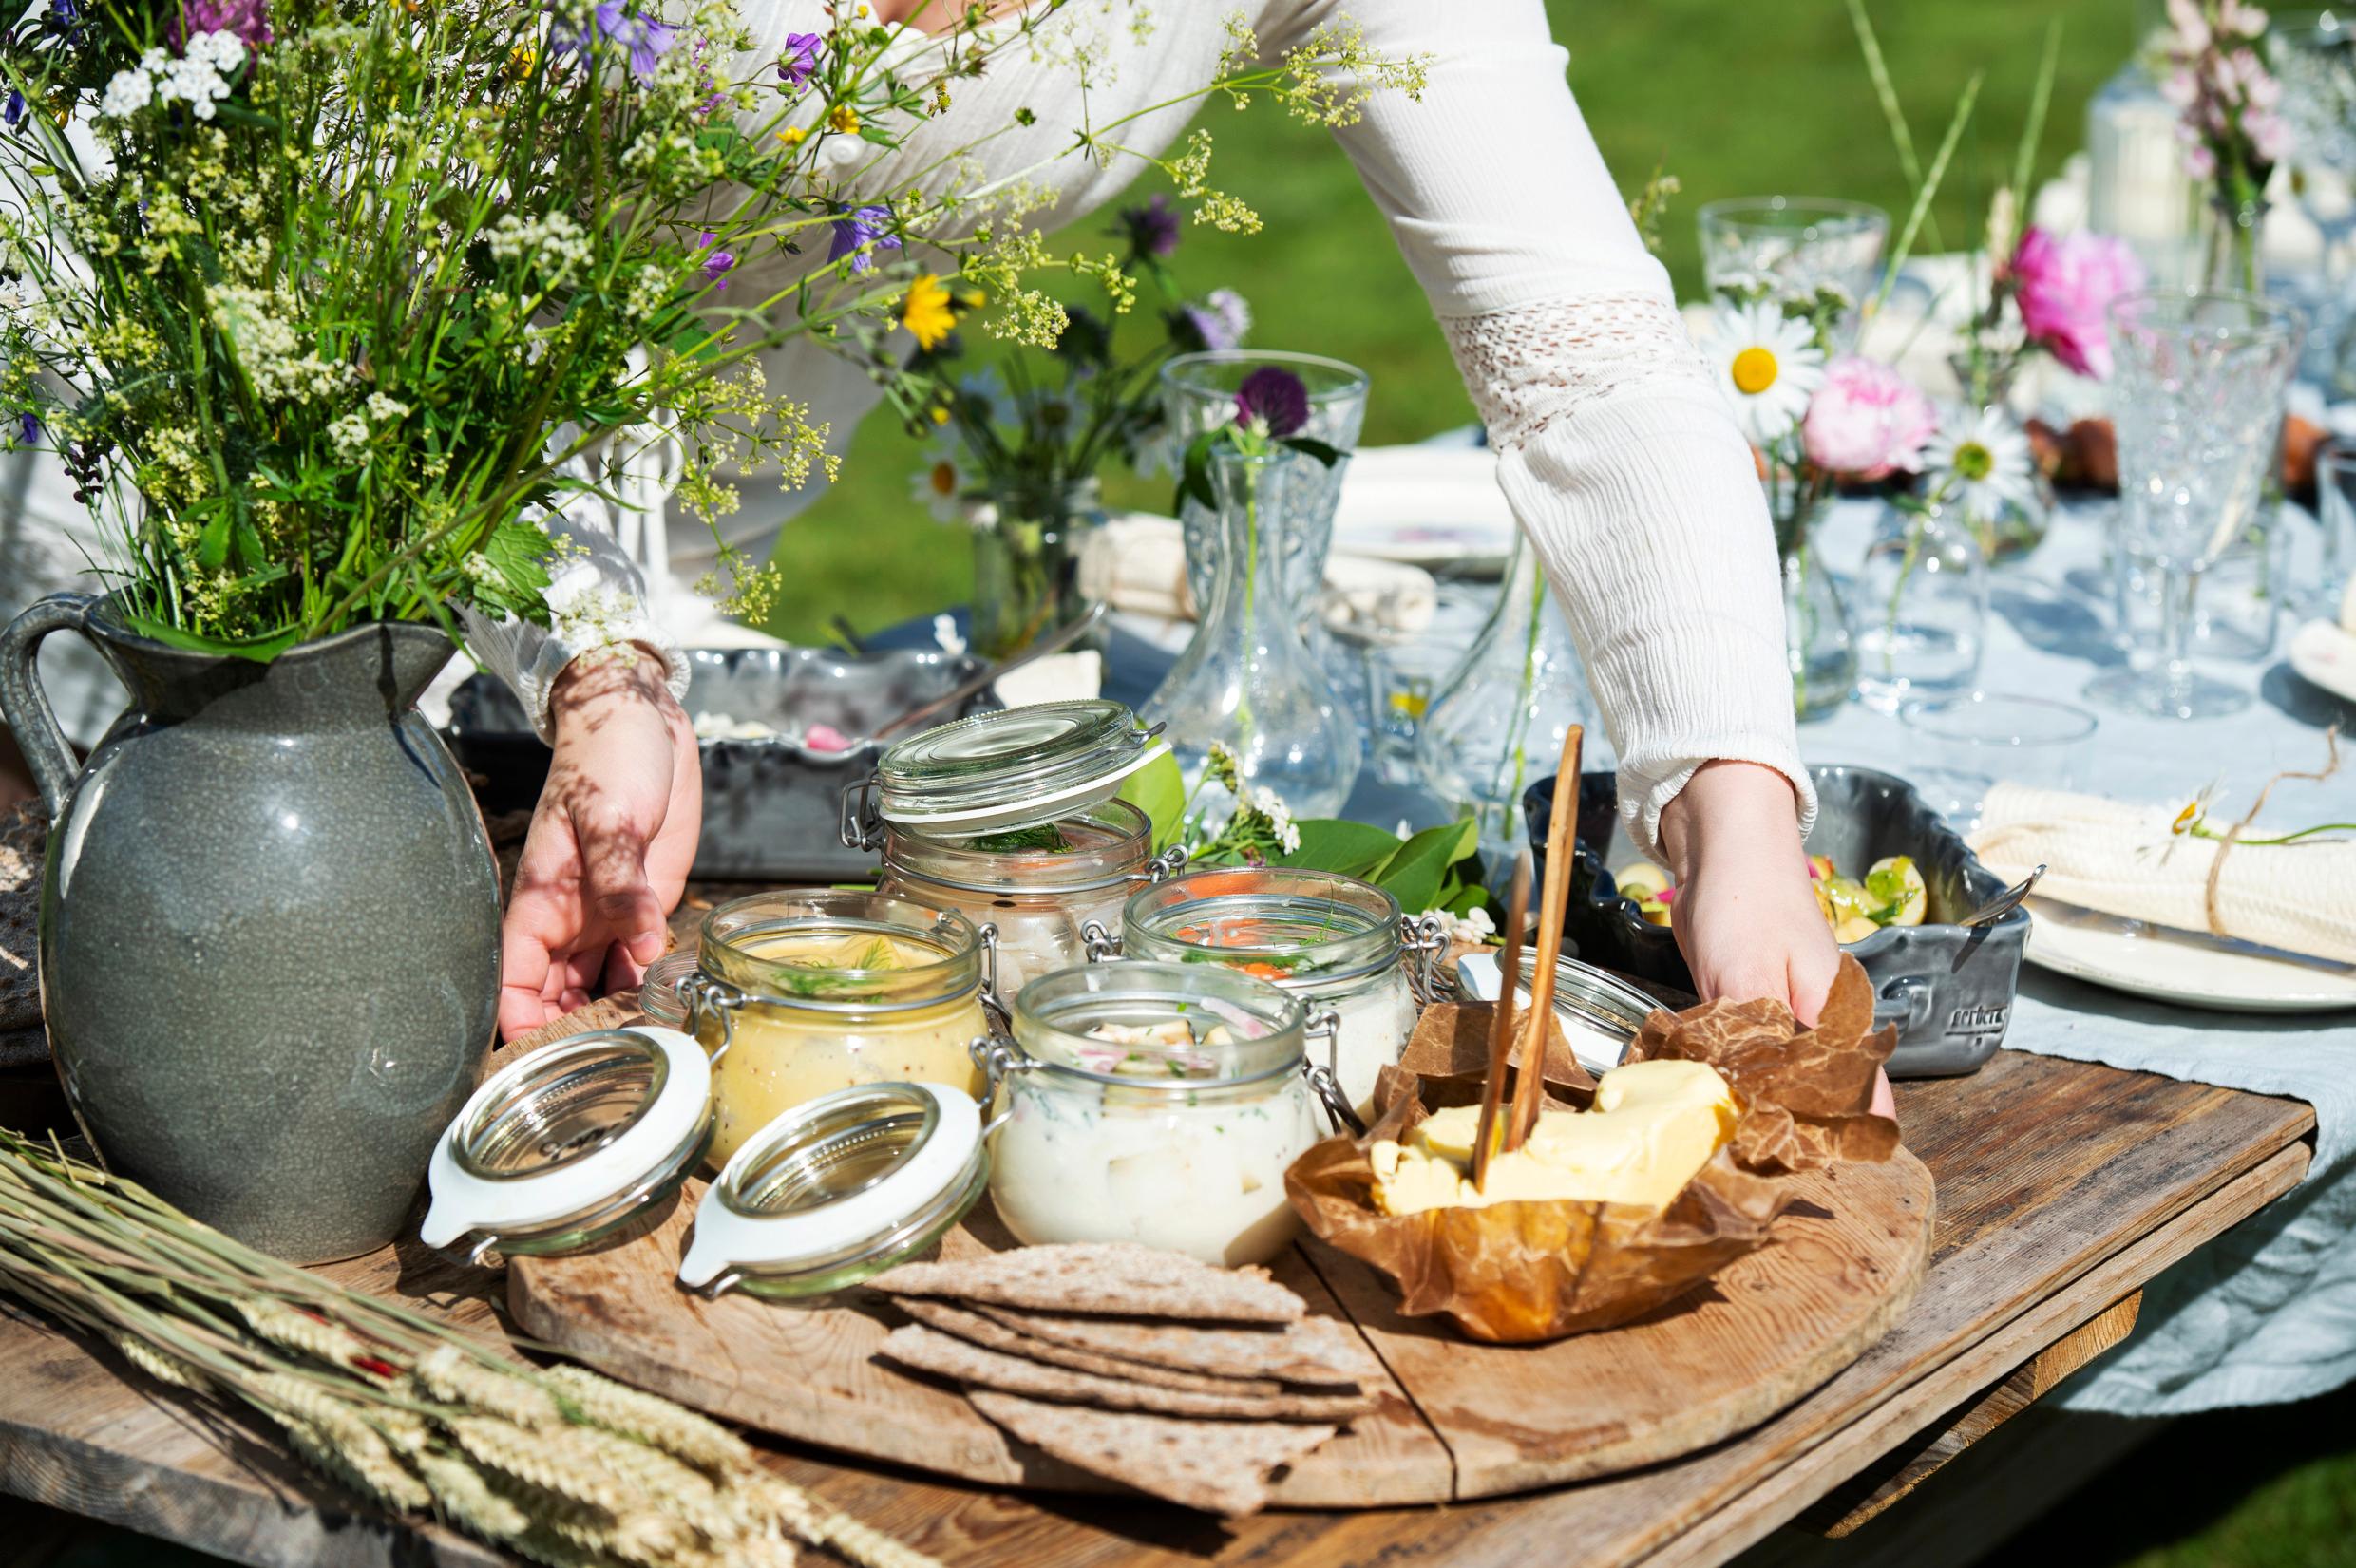 Herring in glass jars, butter and crispbread on tray on a table. Two arms are seen holding the tray, a vase with flowers on the left.